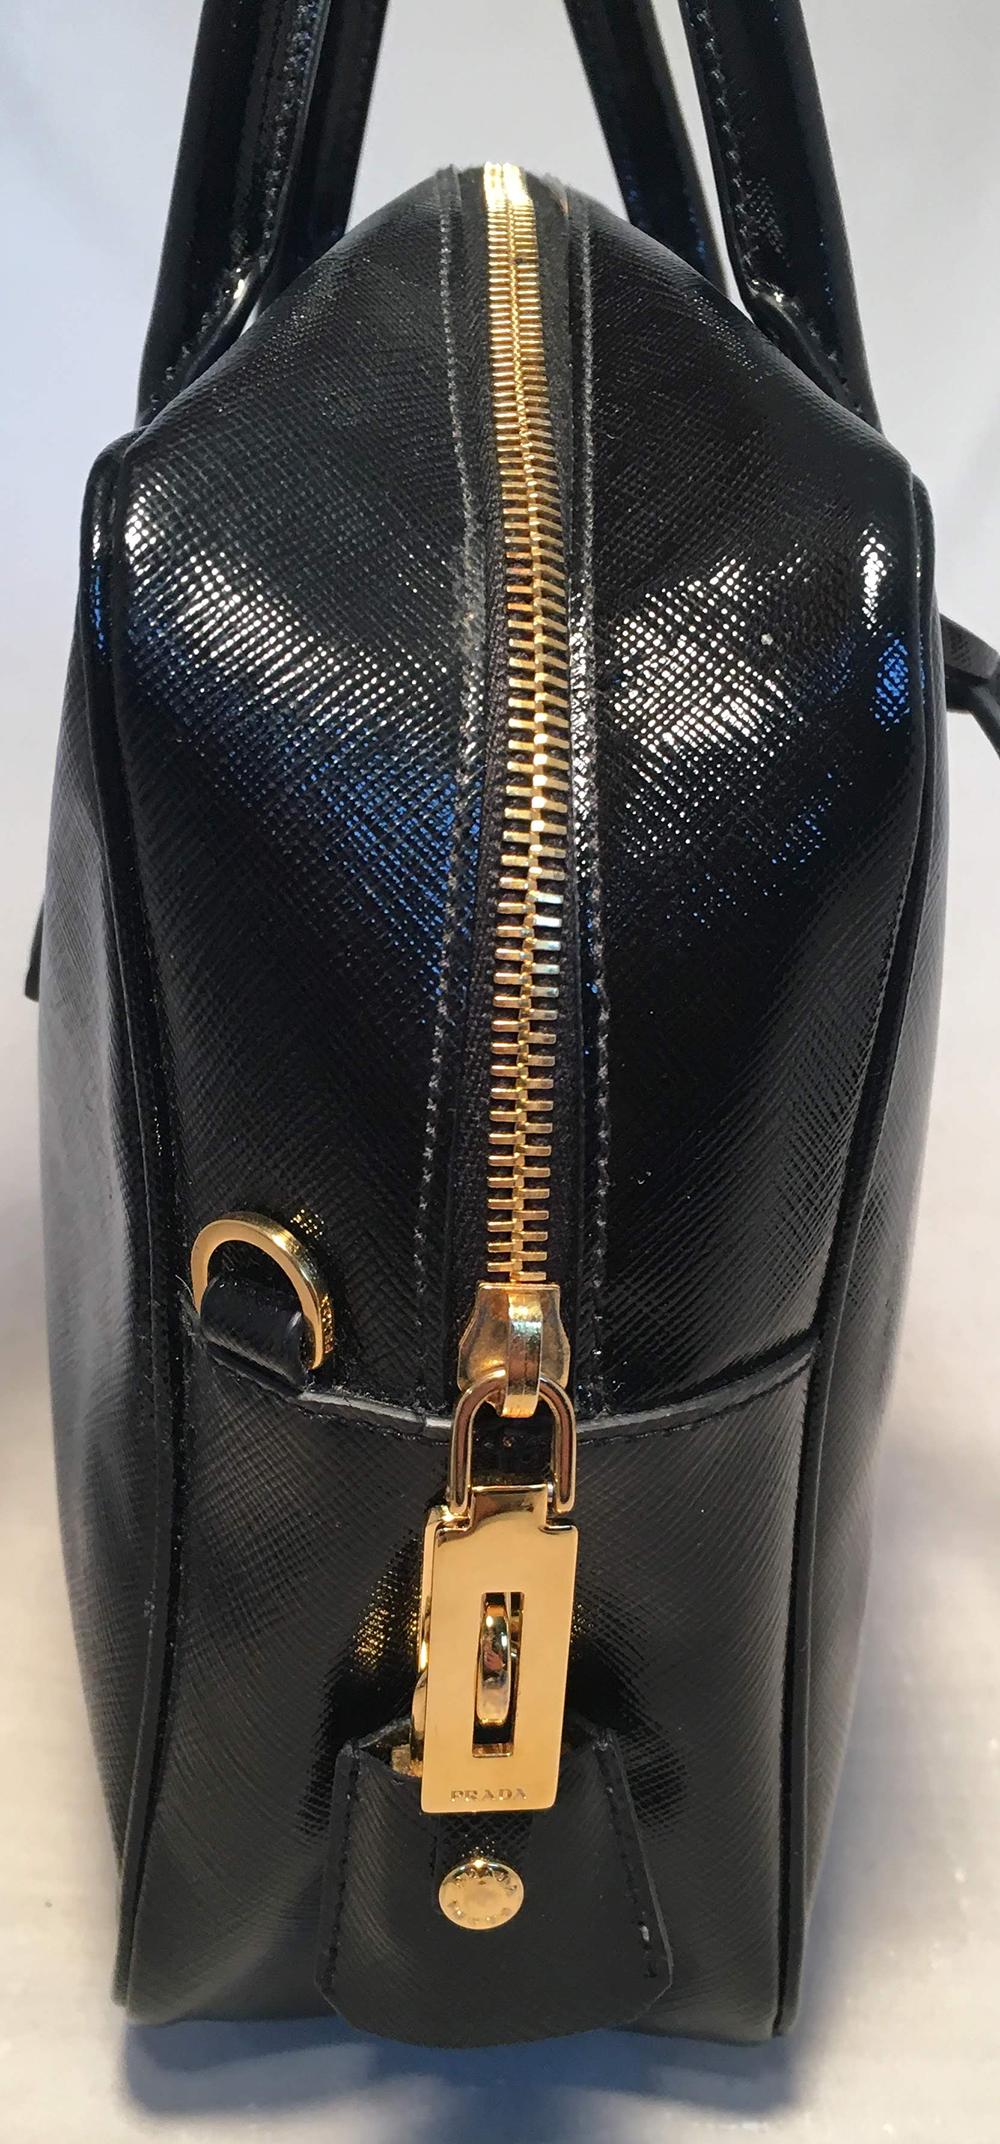 Prada Black and White Patent Saffiano Galleria Bag in excellent condition. Black patent saffiano leather exterior trimmed with gold hardware and a white leather flower on each side. Clochette with keys attached. Top zipper closure opens to a black